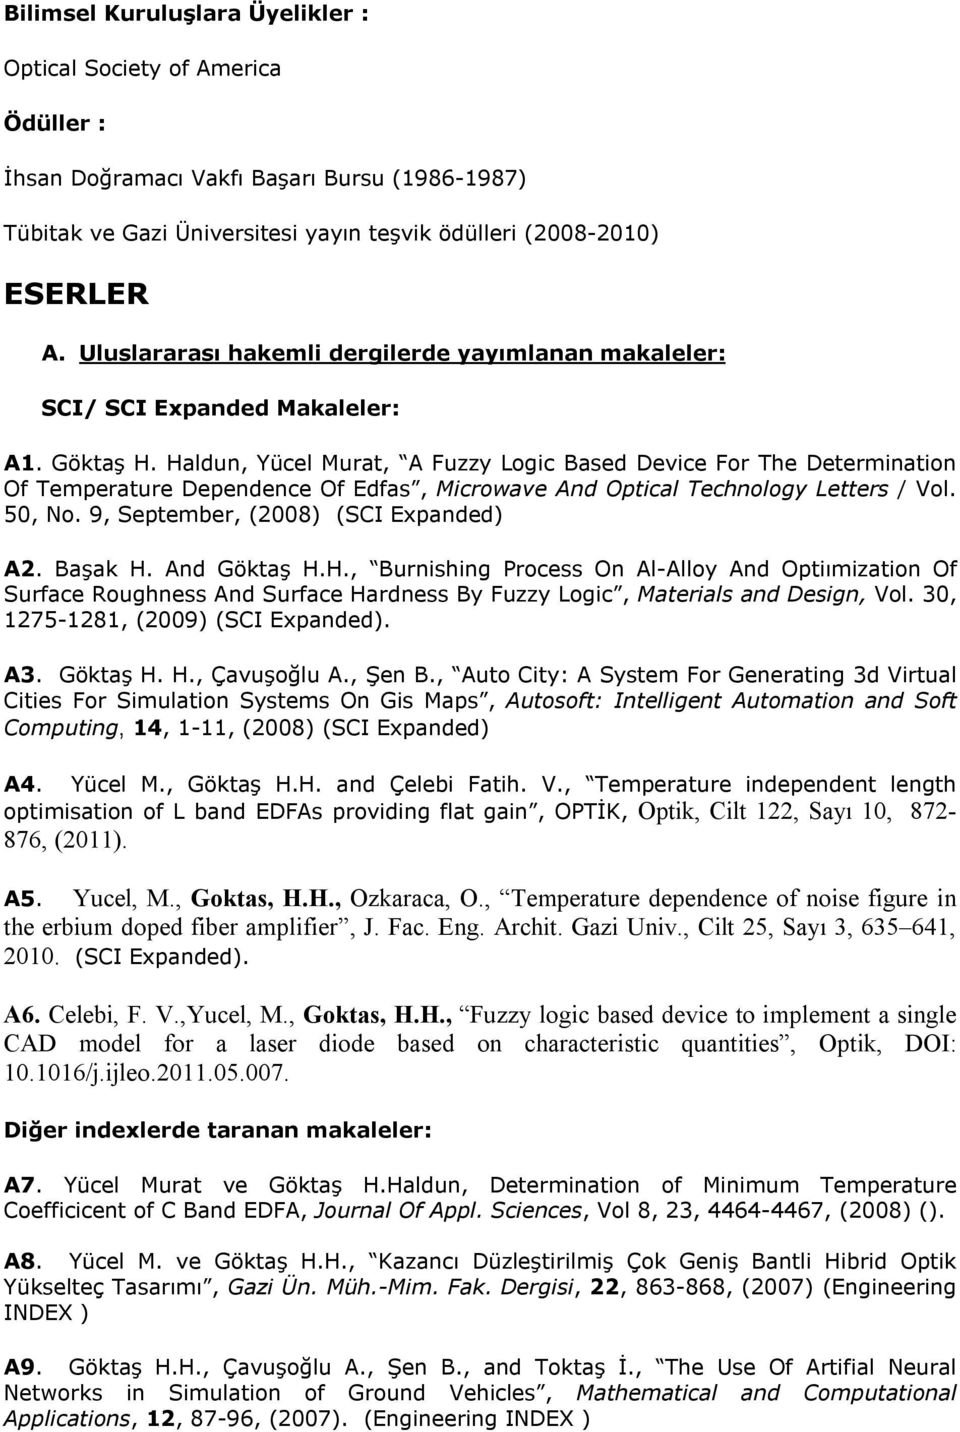 Haldun, Yücel Murat, A Fuzzy Logic Based Device For The Determination Of Temperature Dependence Of Edfas, Microwave And Optical Technology Letters / Vol. 50, No.